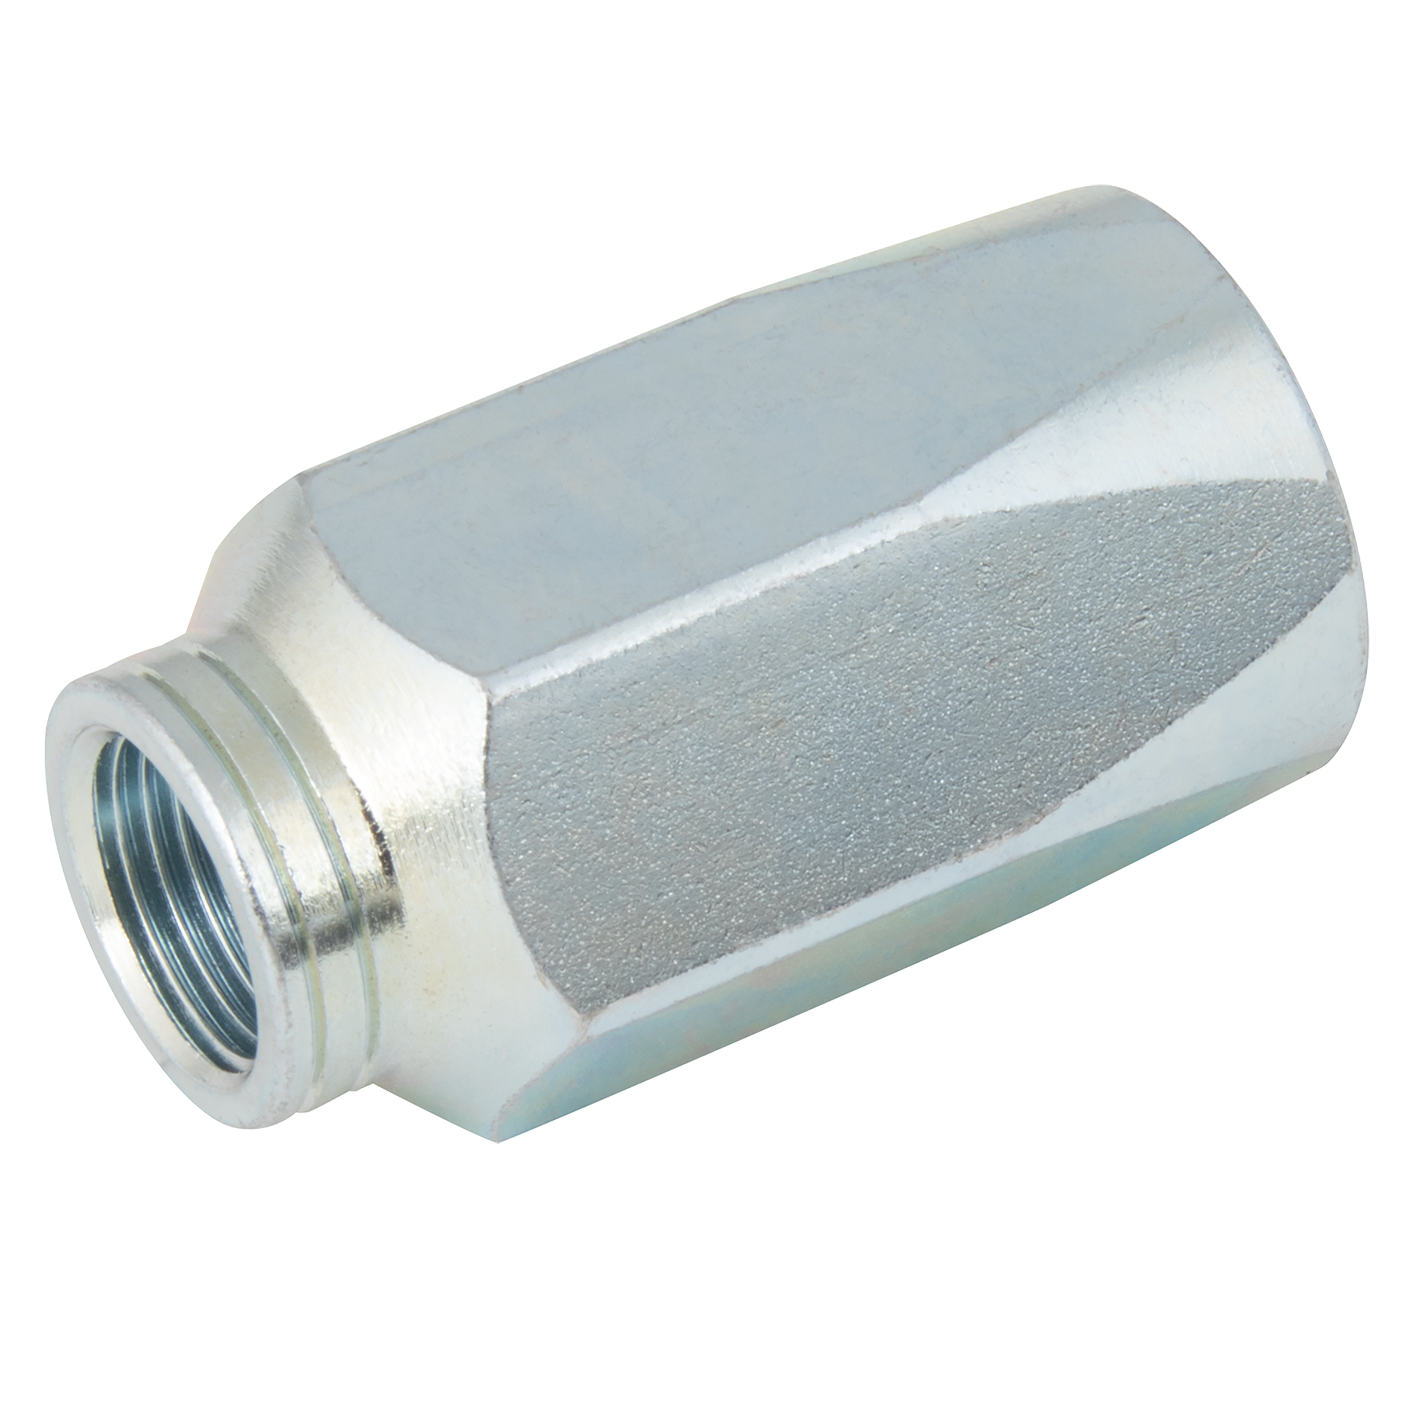 Hydraulic Reusable Ferrule R2AT Non-skive Hose ID 1/4"